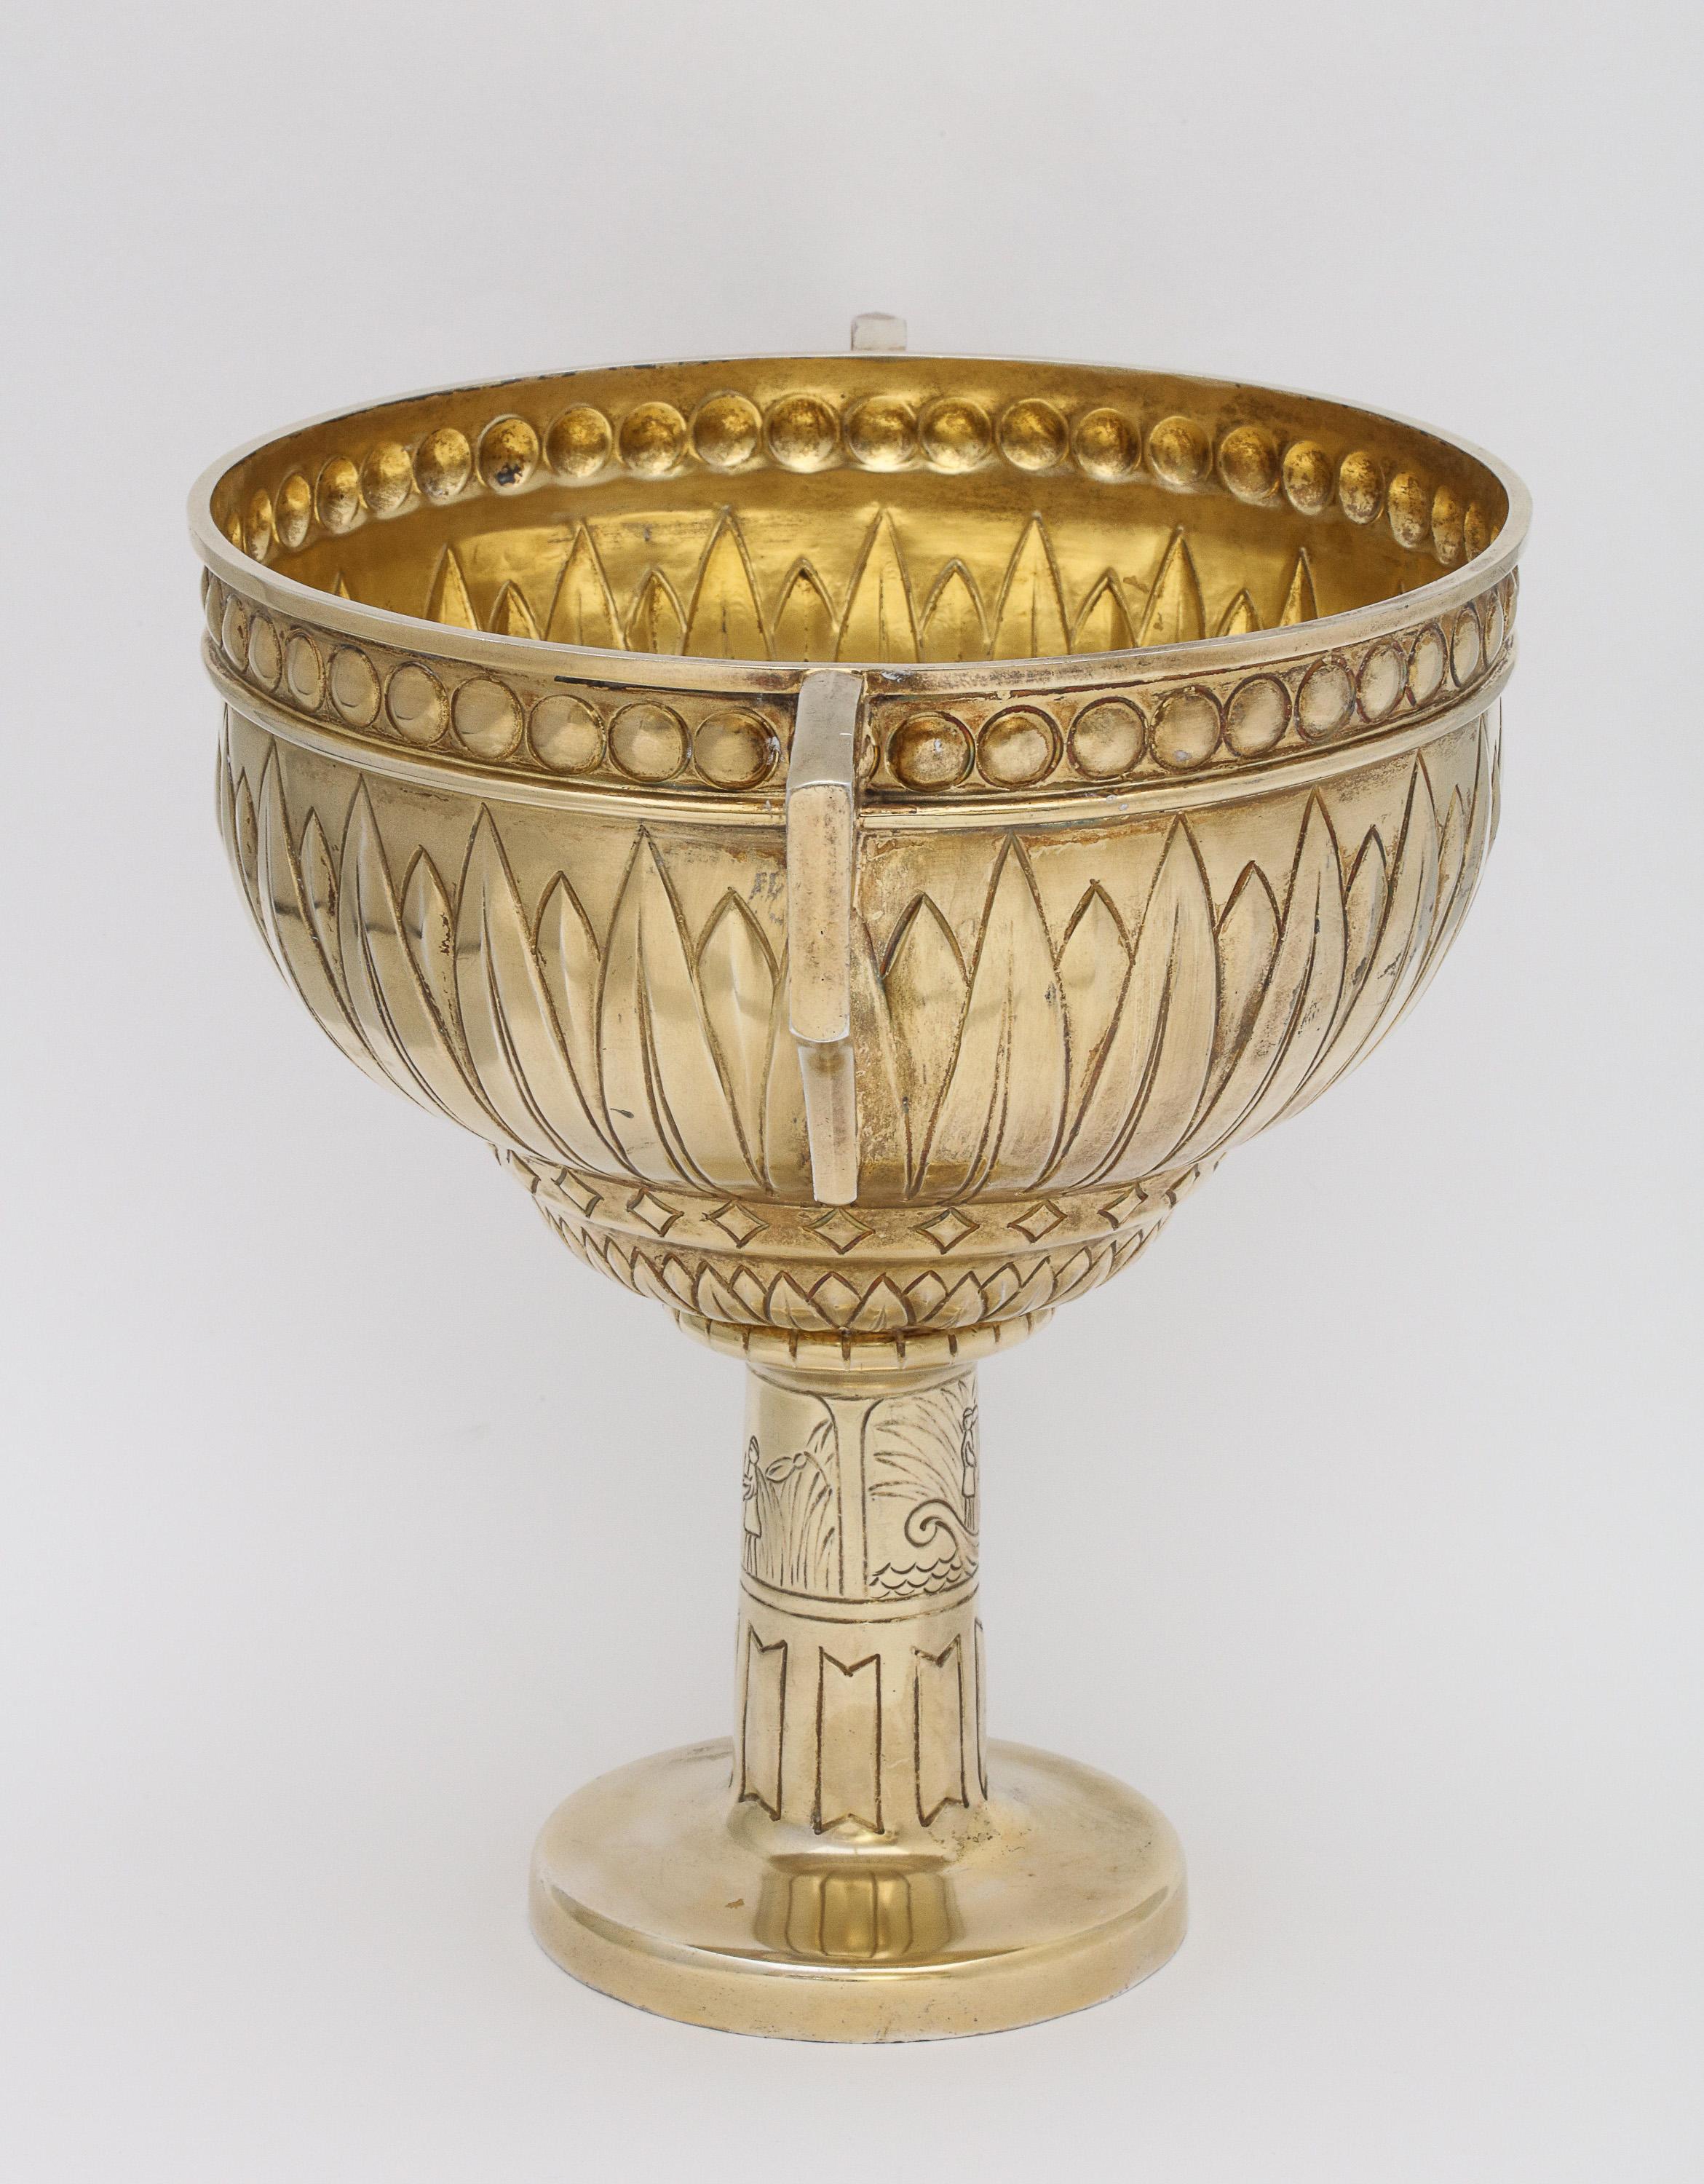 Early 20th Century Art Deco Sterling Silver-Gilt Egyptian-Revival Two-Handled Centerpiece For Sale